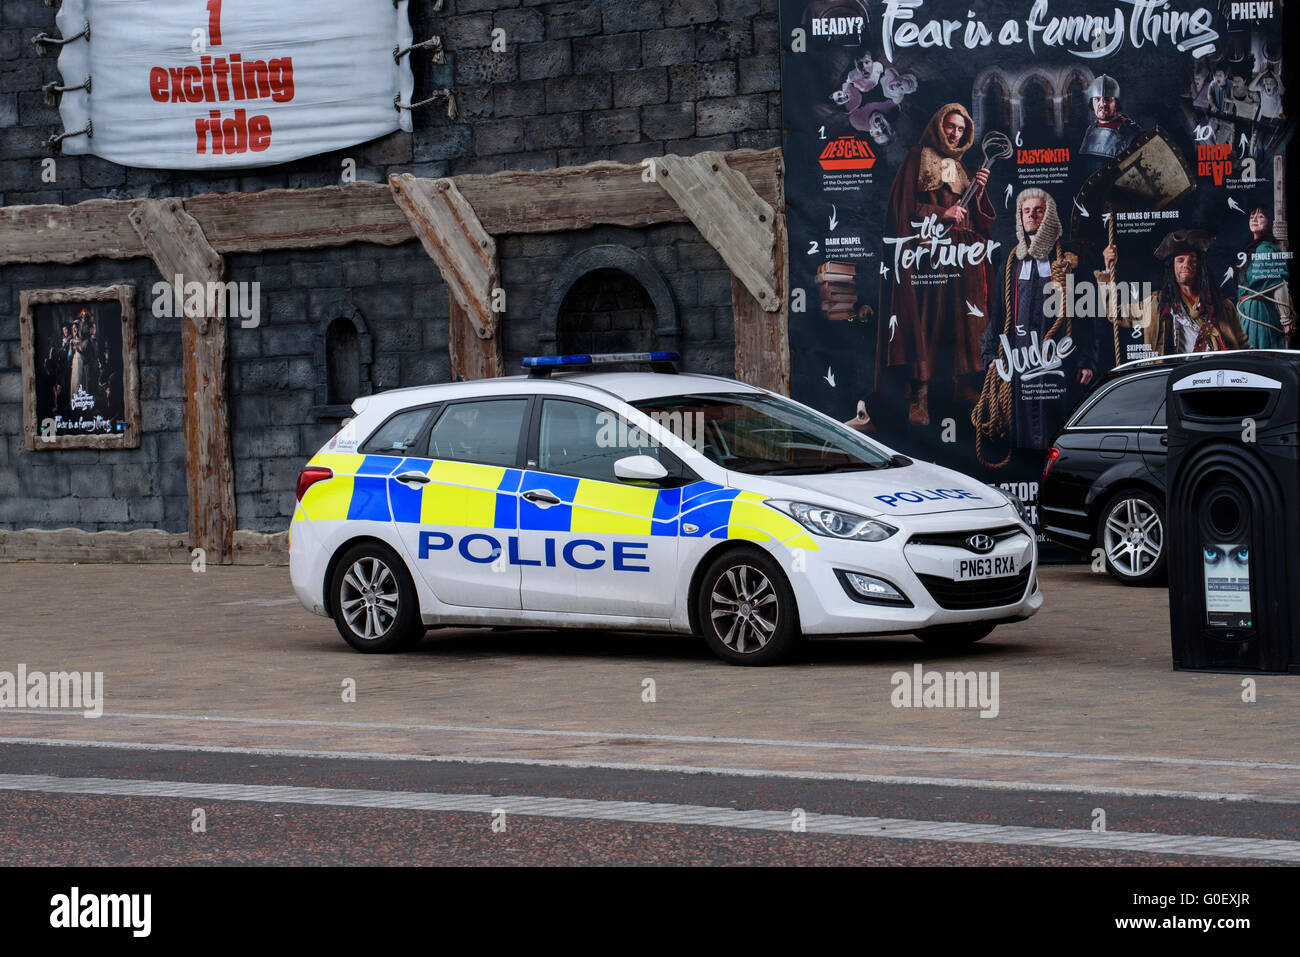 Police patrol car outside the Tower Dungeon tourist attraction on the promenade in Blackpool, Lancashire, UK Stock Photo